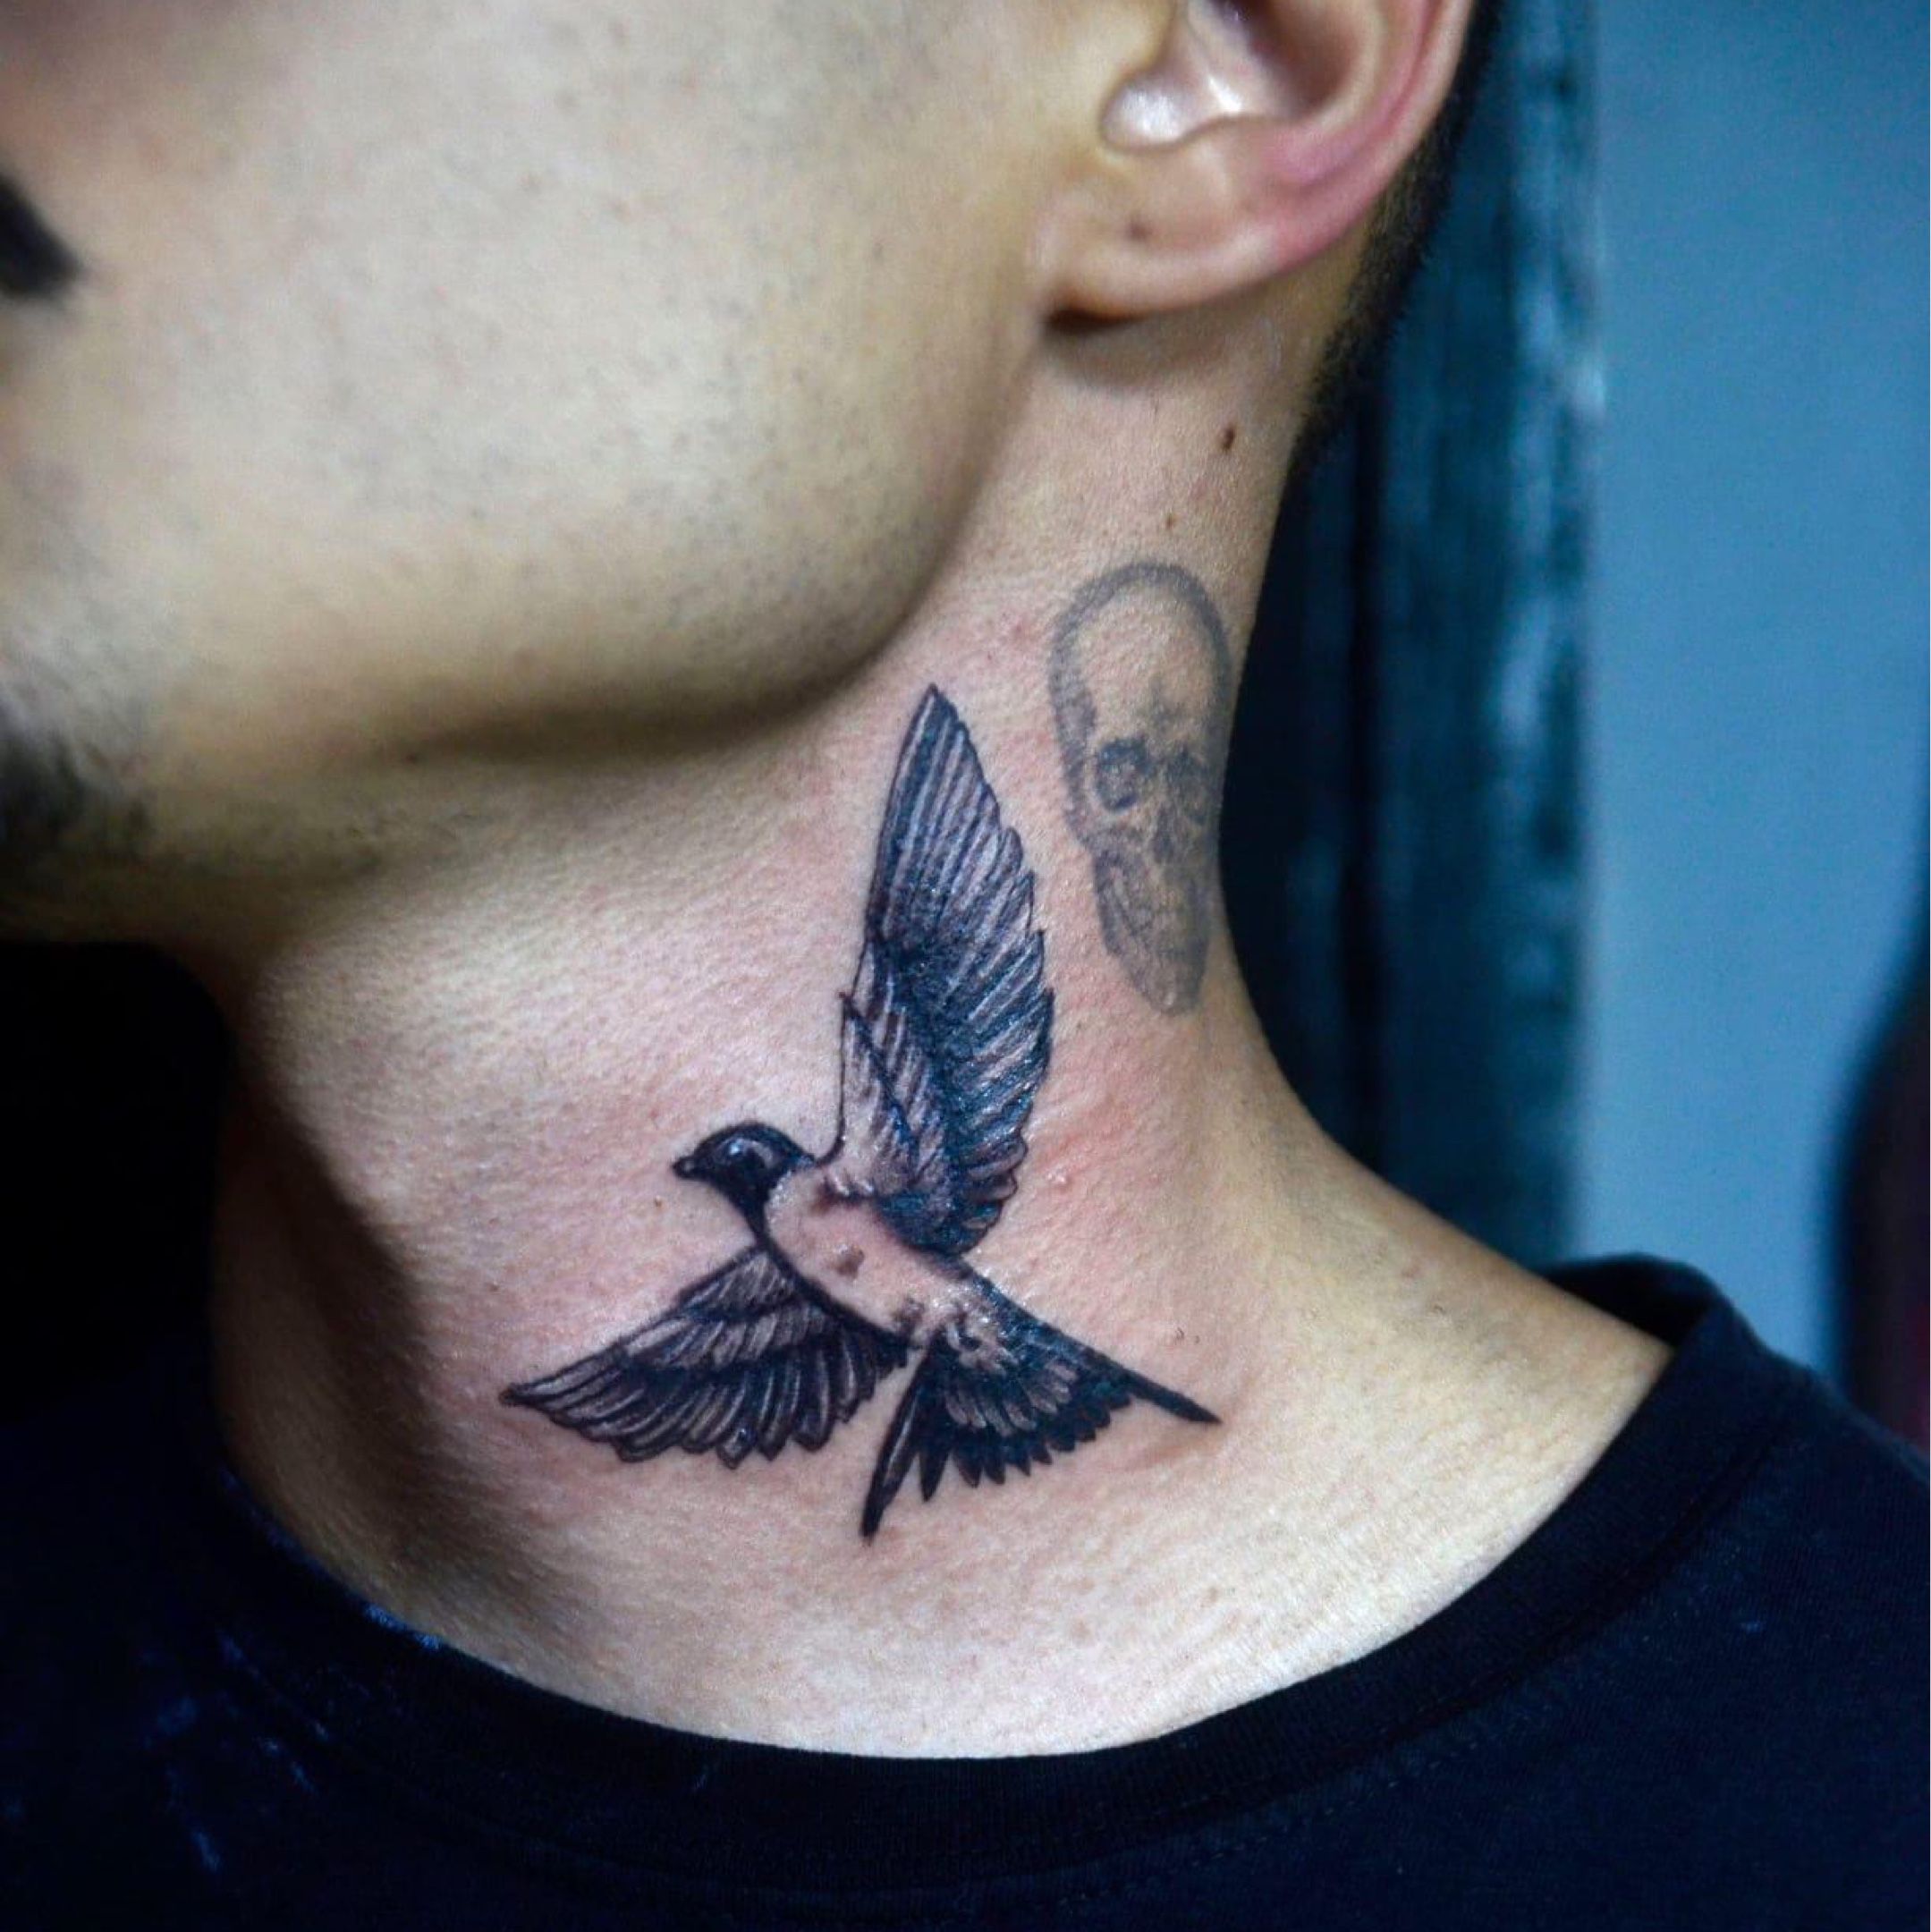 101 Amazing Sparrow Tattoo Ideas That Will Blow Your Mind!